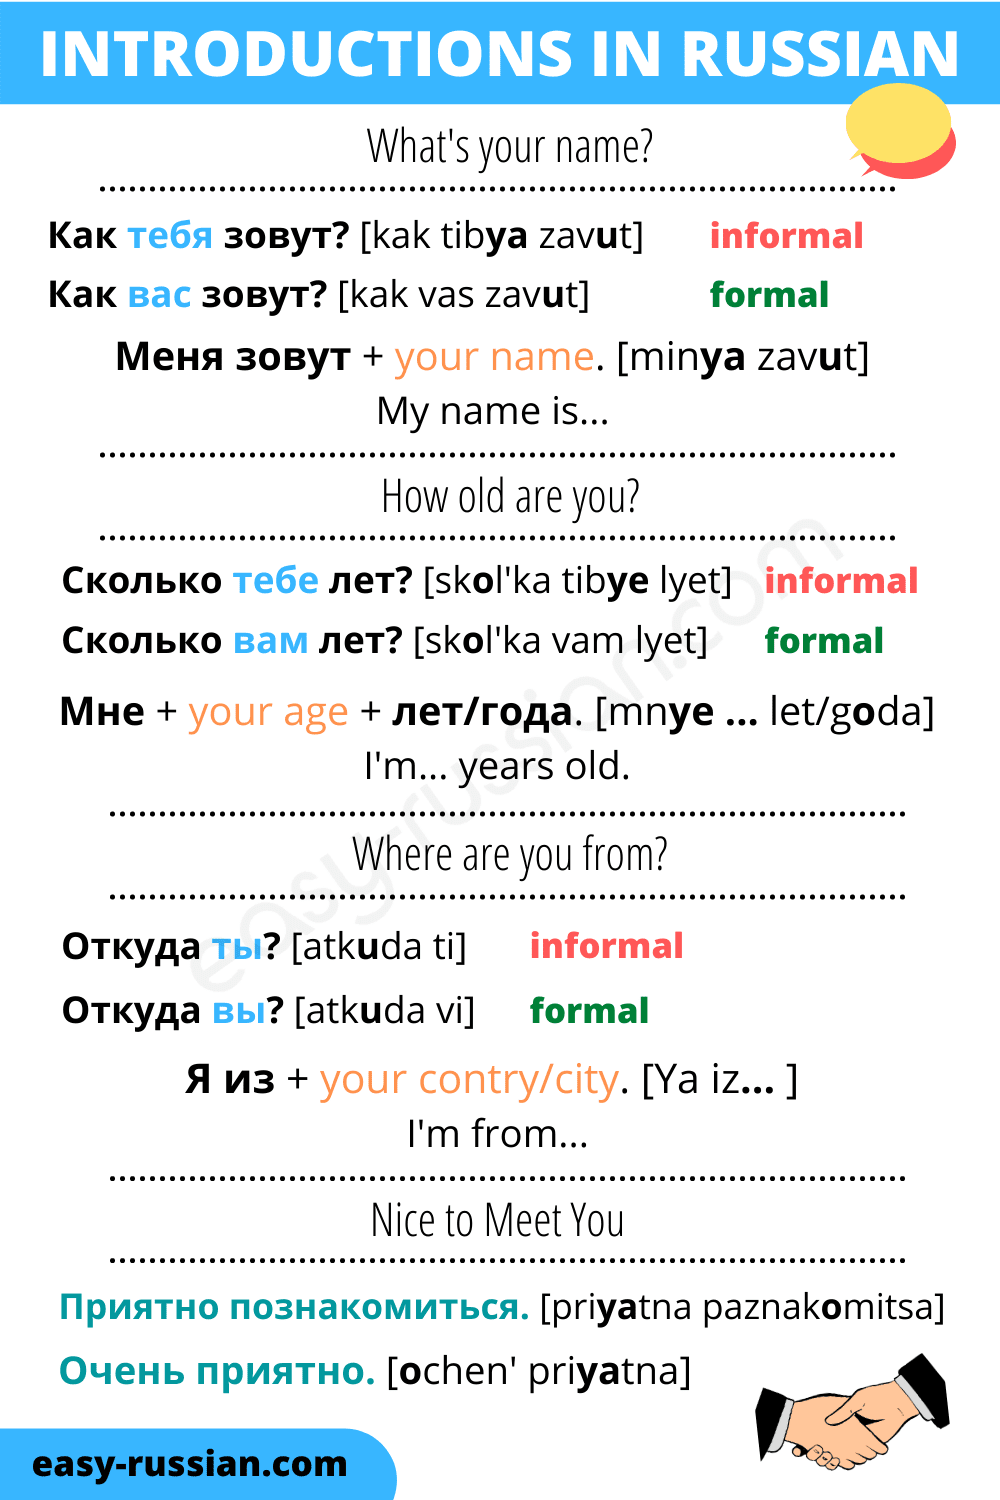 Introductions in Russian